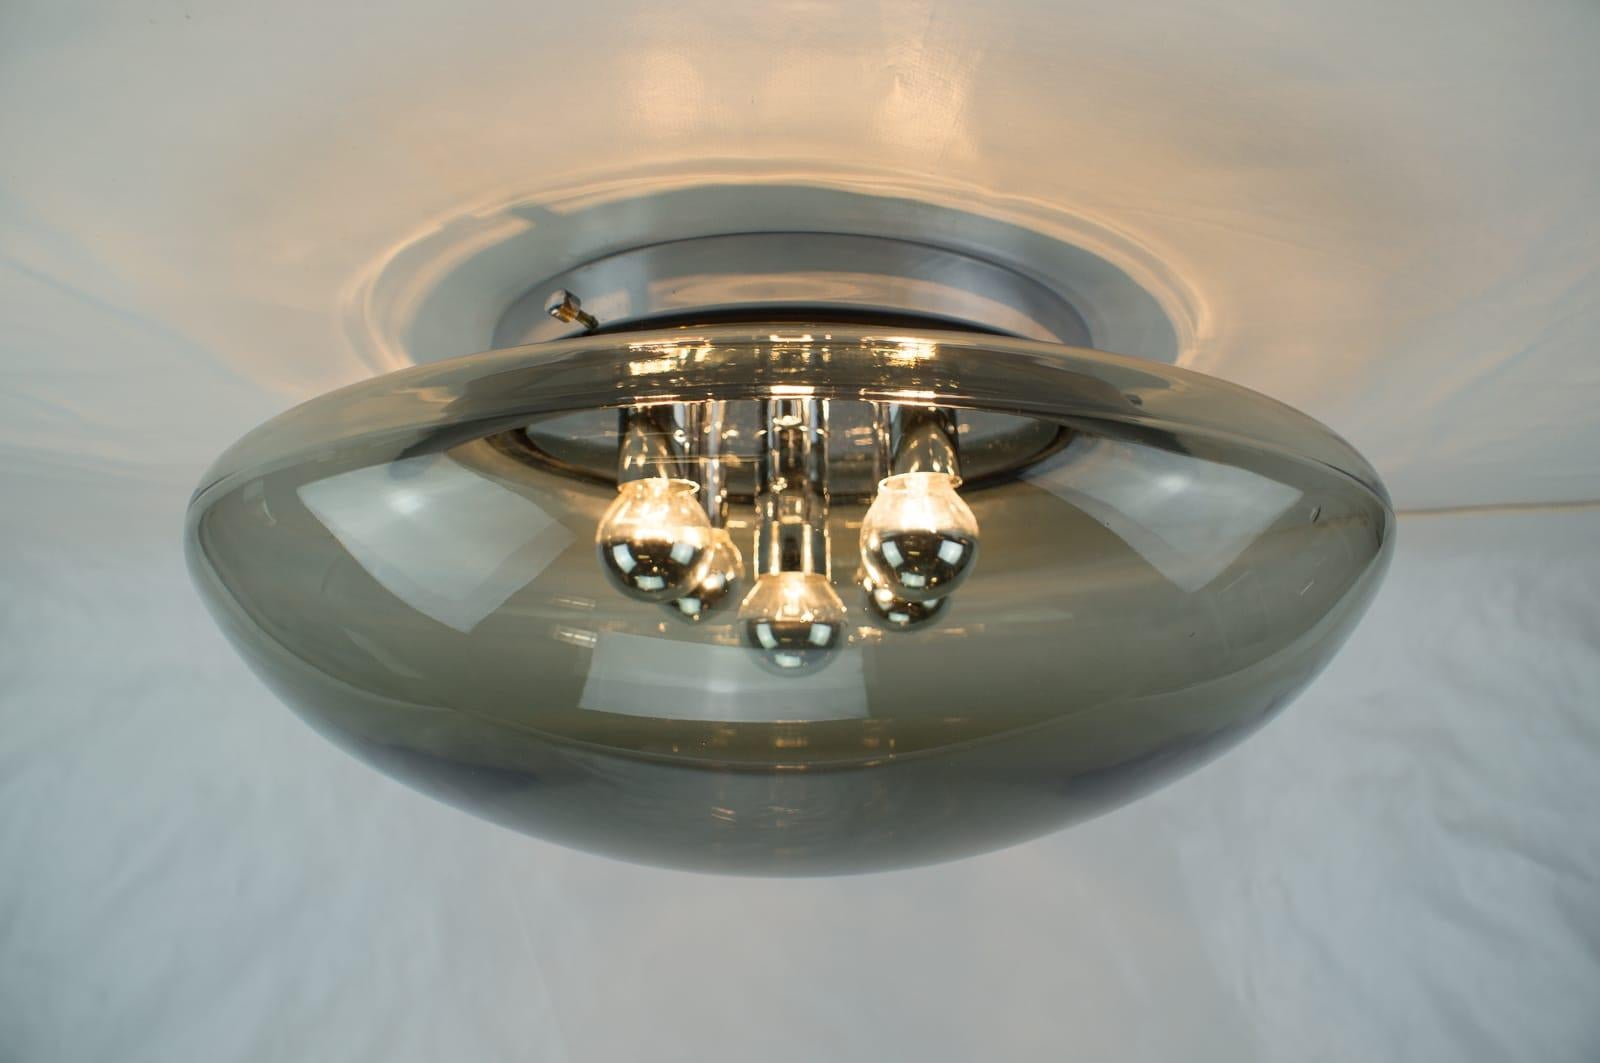 Huge Vintage Smoked Glass and Chrome Wall Light from Hilldebrand, Germany, 1960s For Sale 1